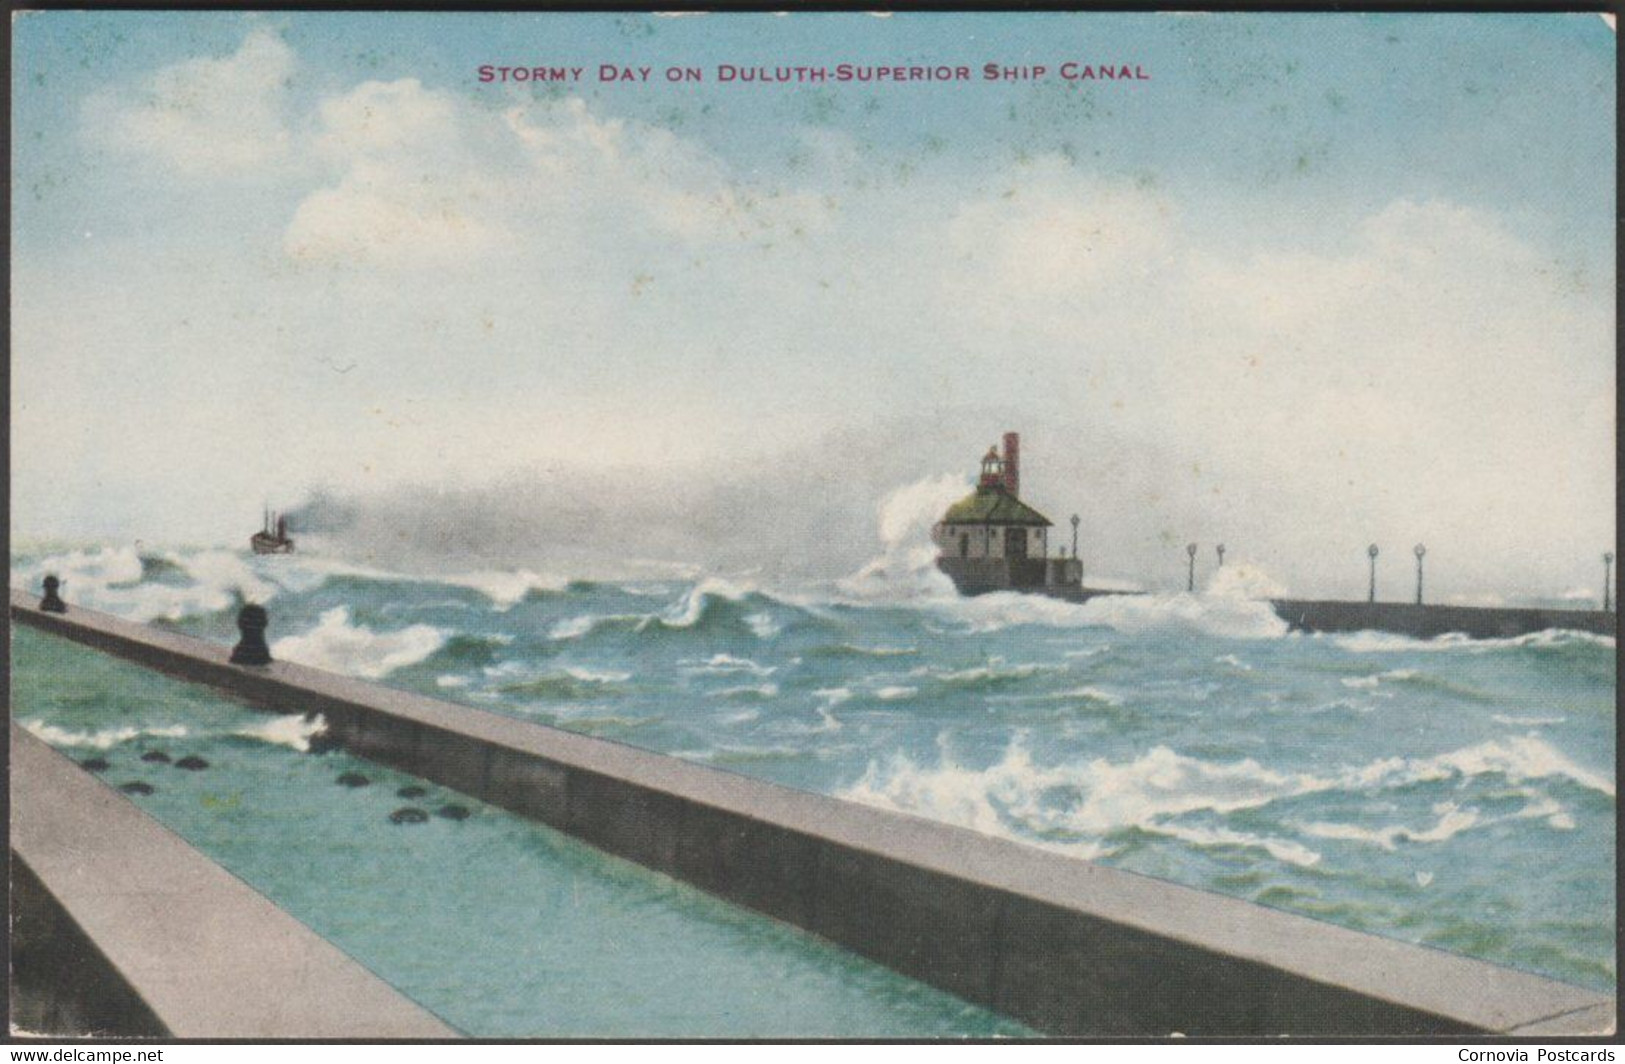 Stormy Day On Duluth-Superior Ship Canal, Minnesota, C.1910 - VO Hammon Postcard - Duluth